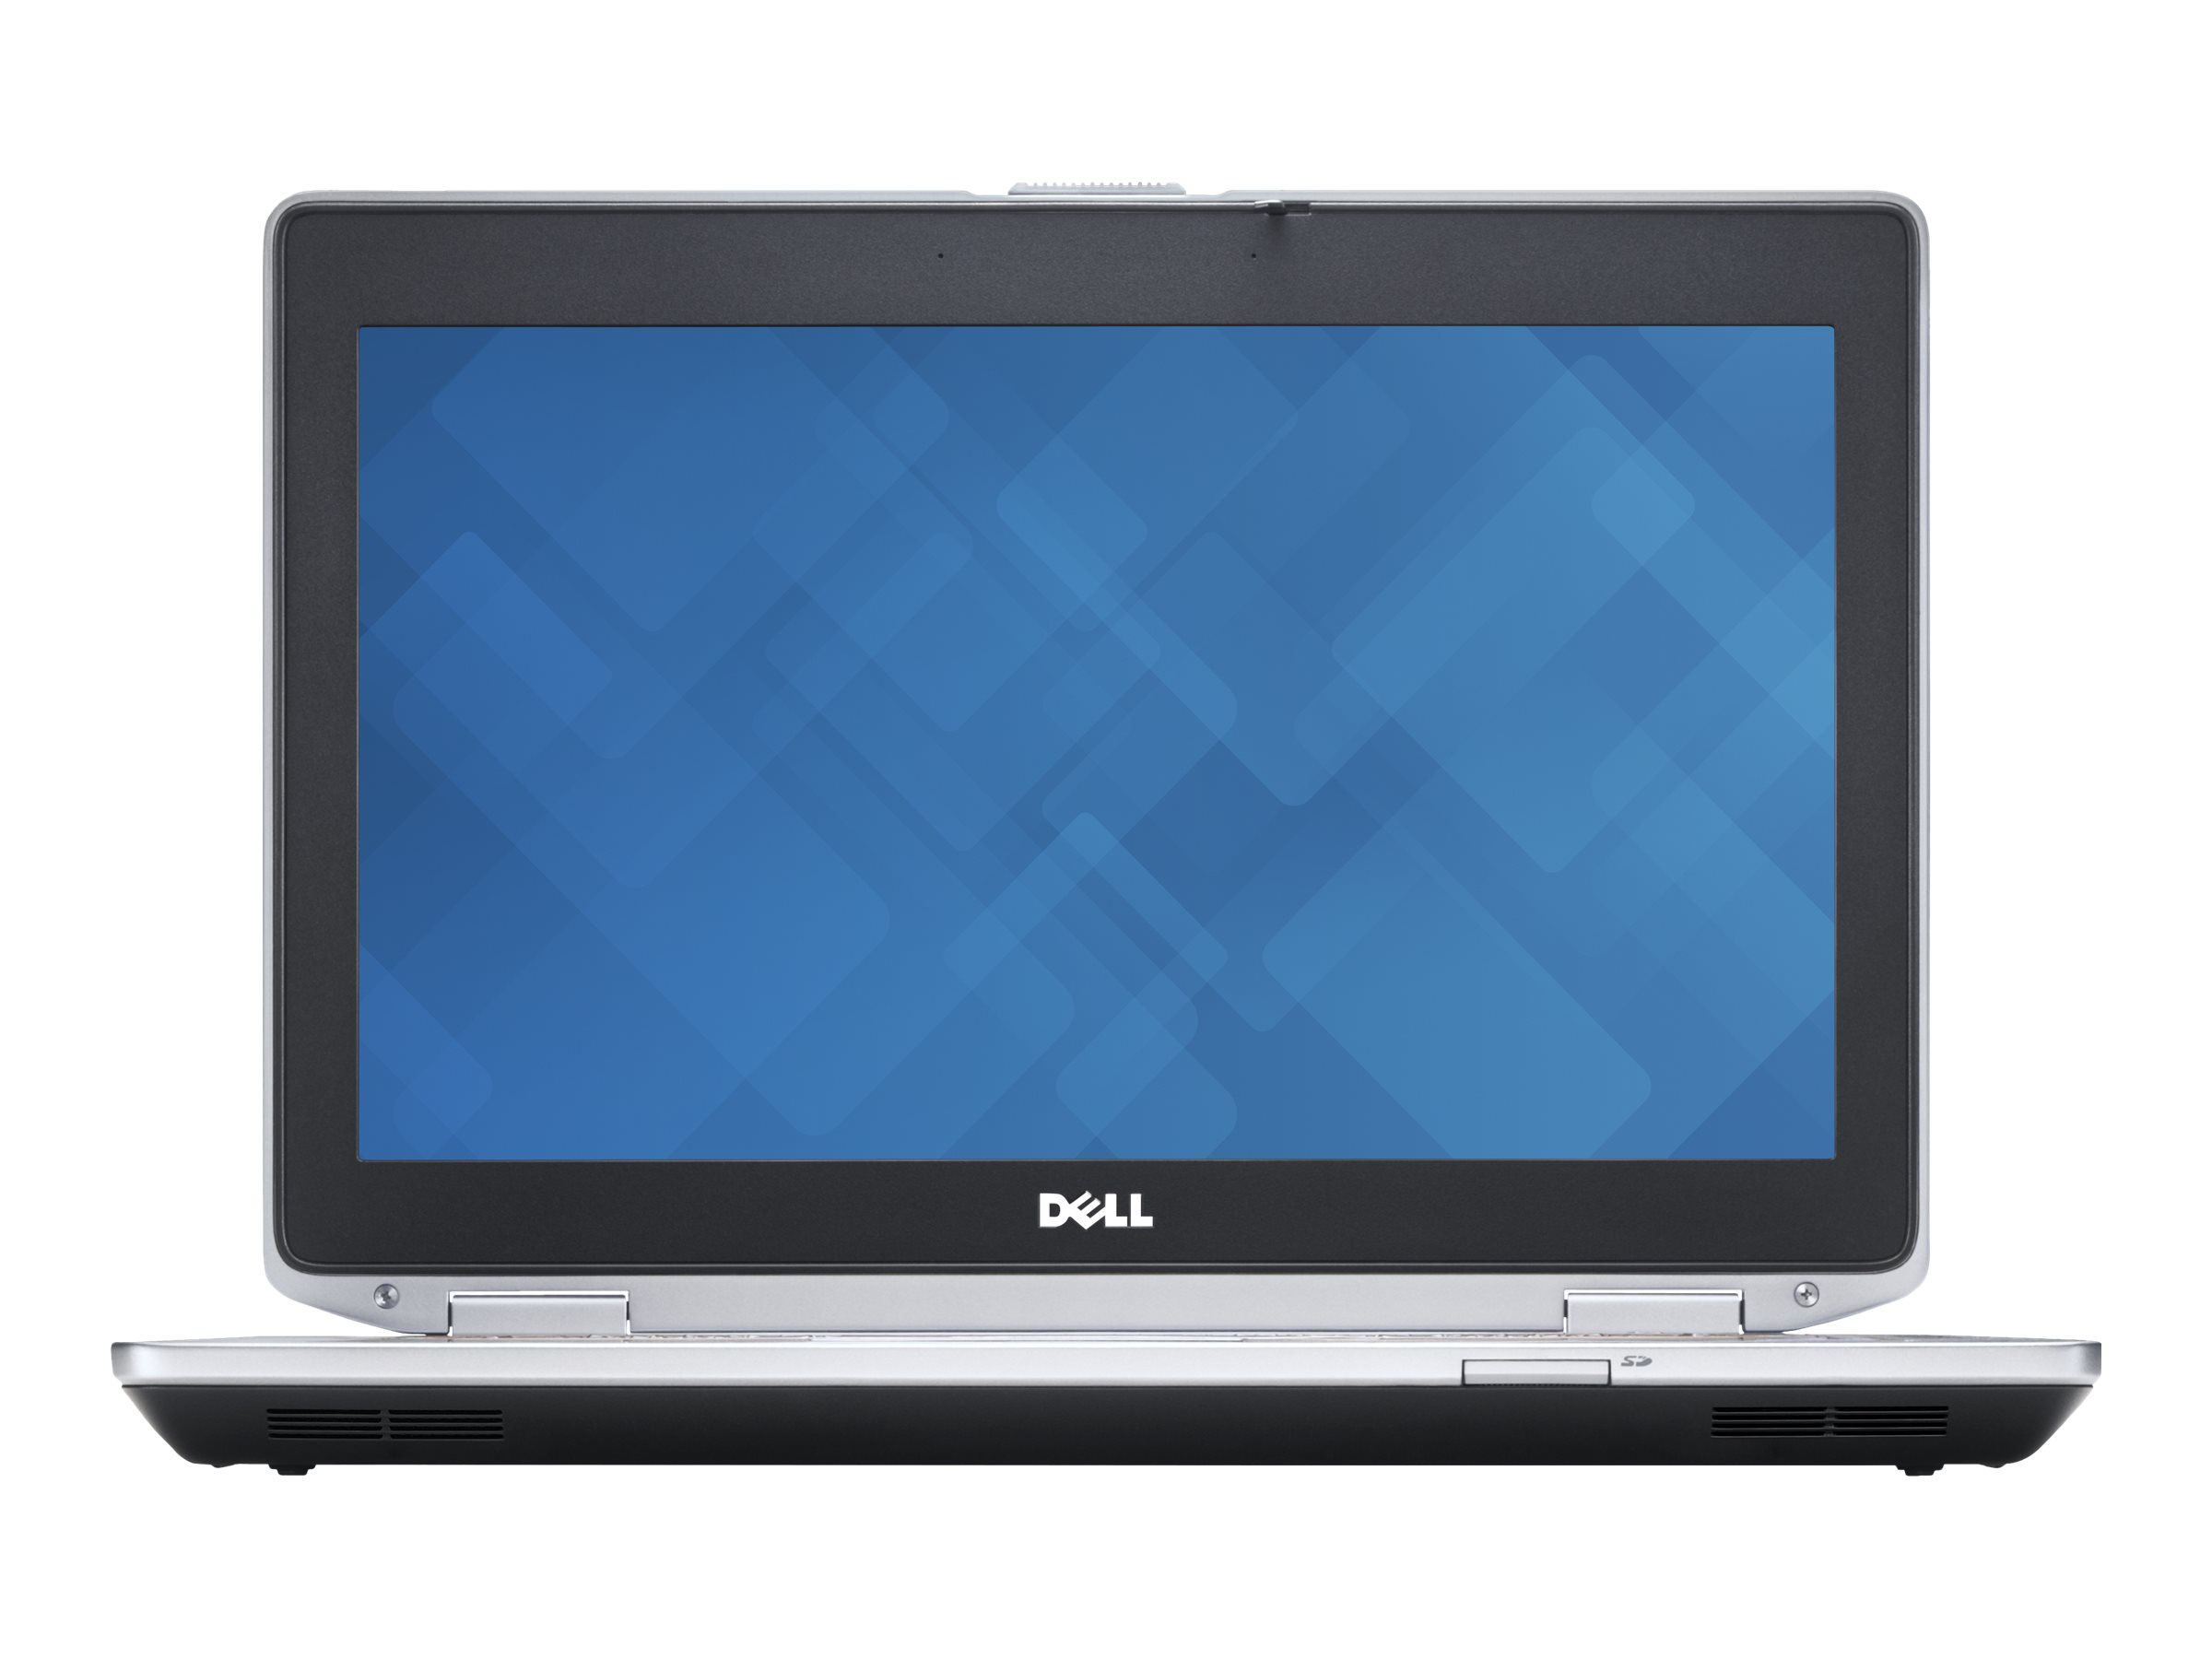 Dell Latitude E6430 - full specs, details and review